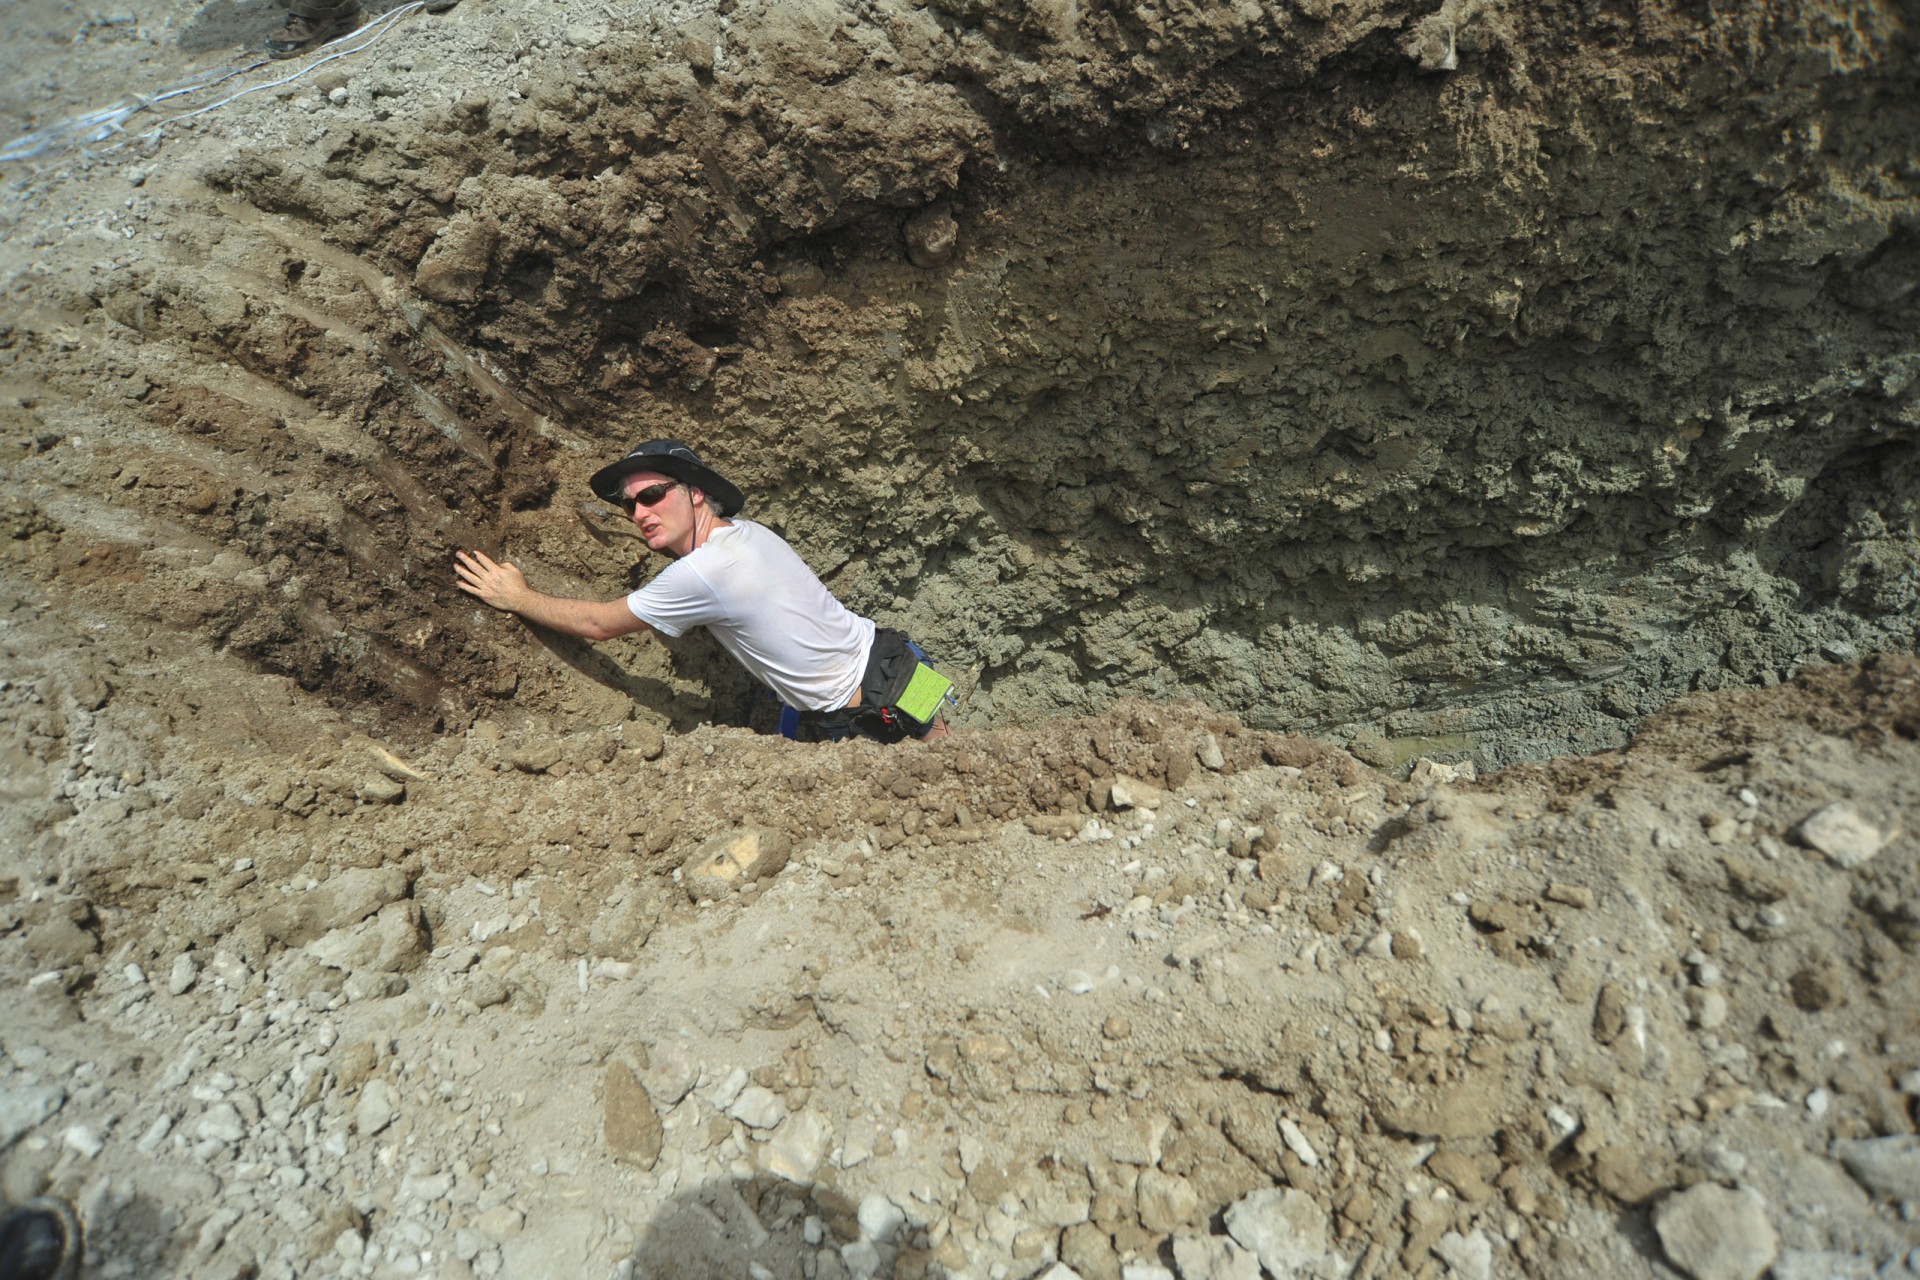 Four trenches were dug  to expose the autochthonous and in-life position fossil reef for bulk sampling